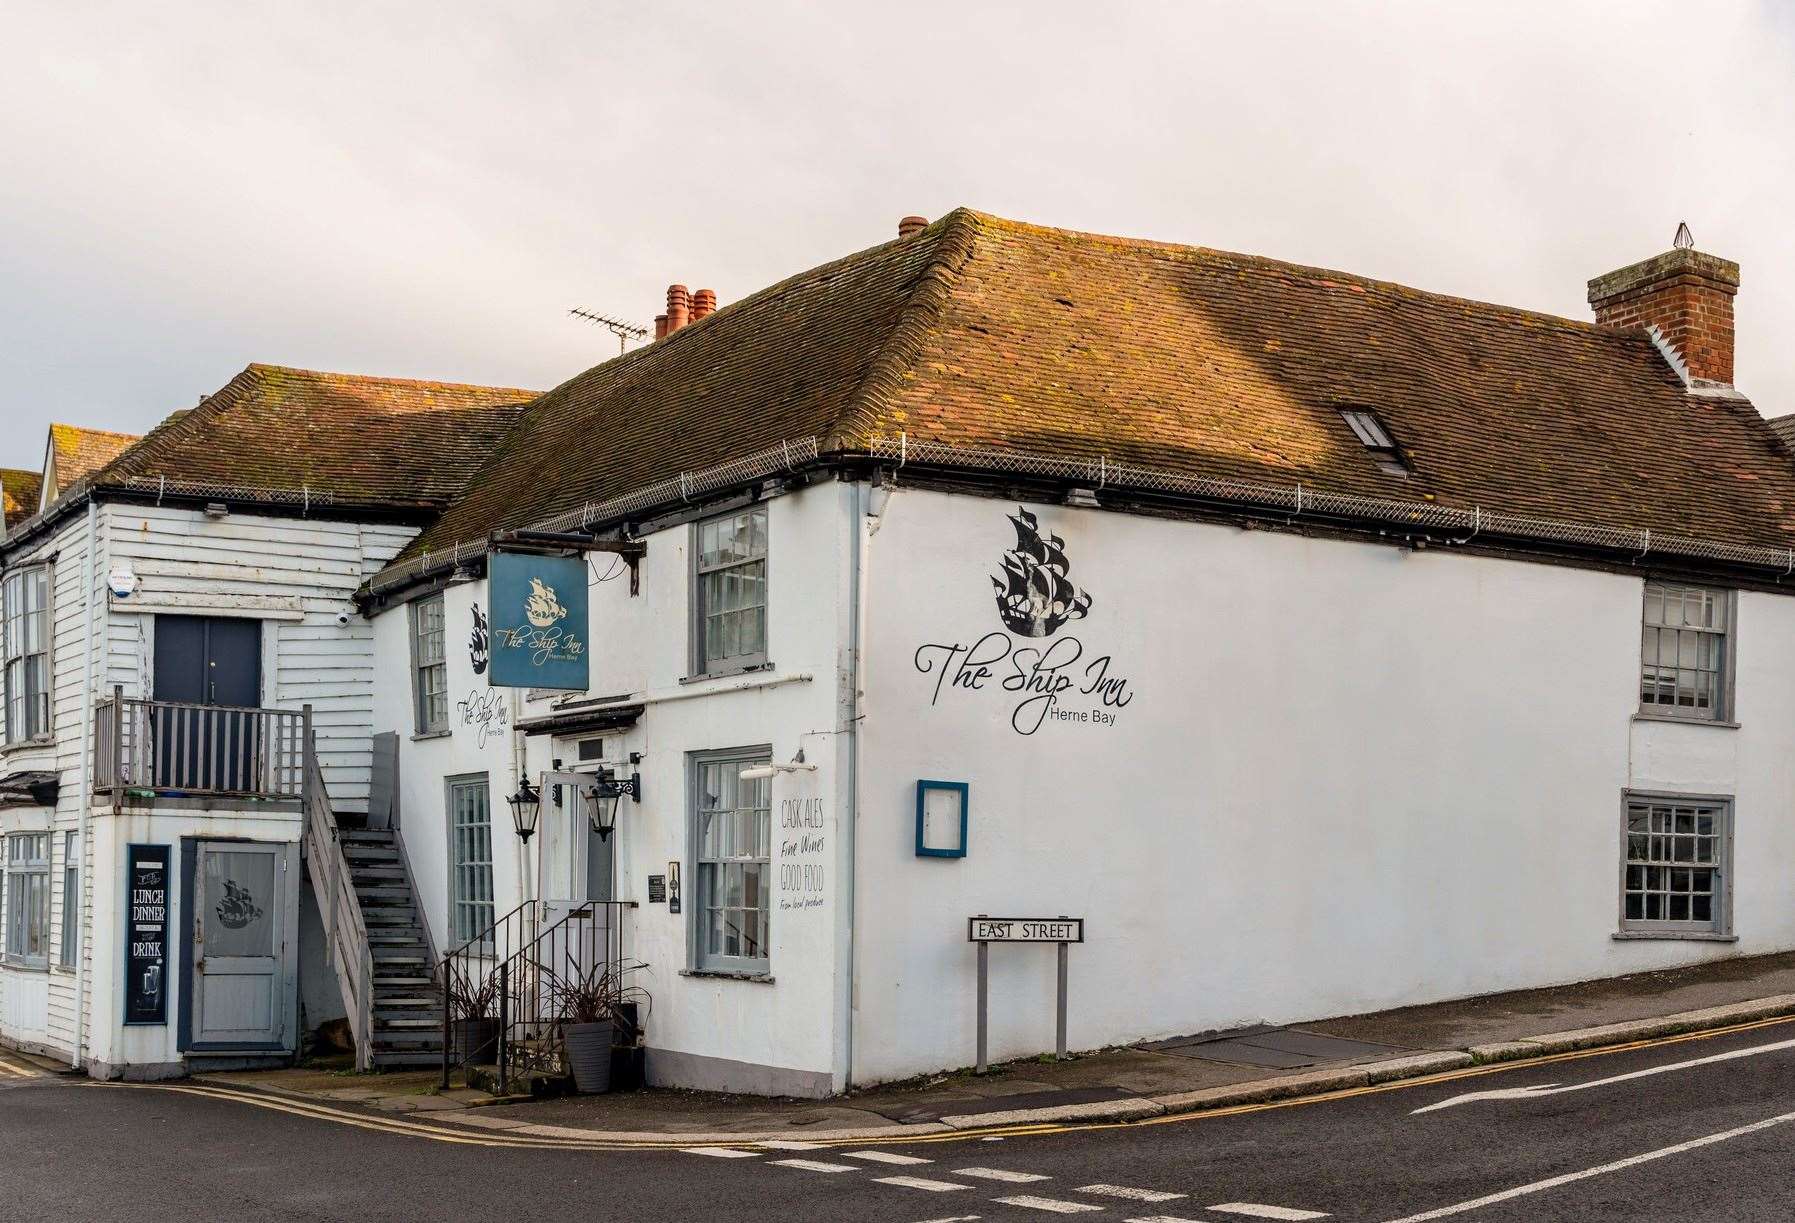 The Ship Inn is believed to be the town's oldest building